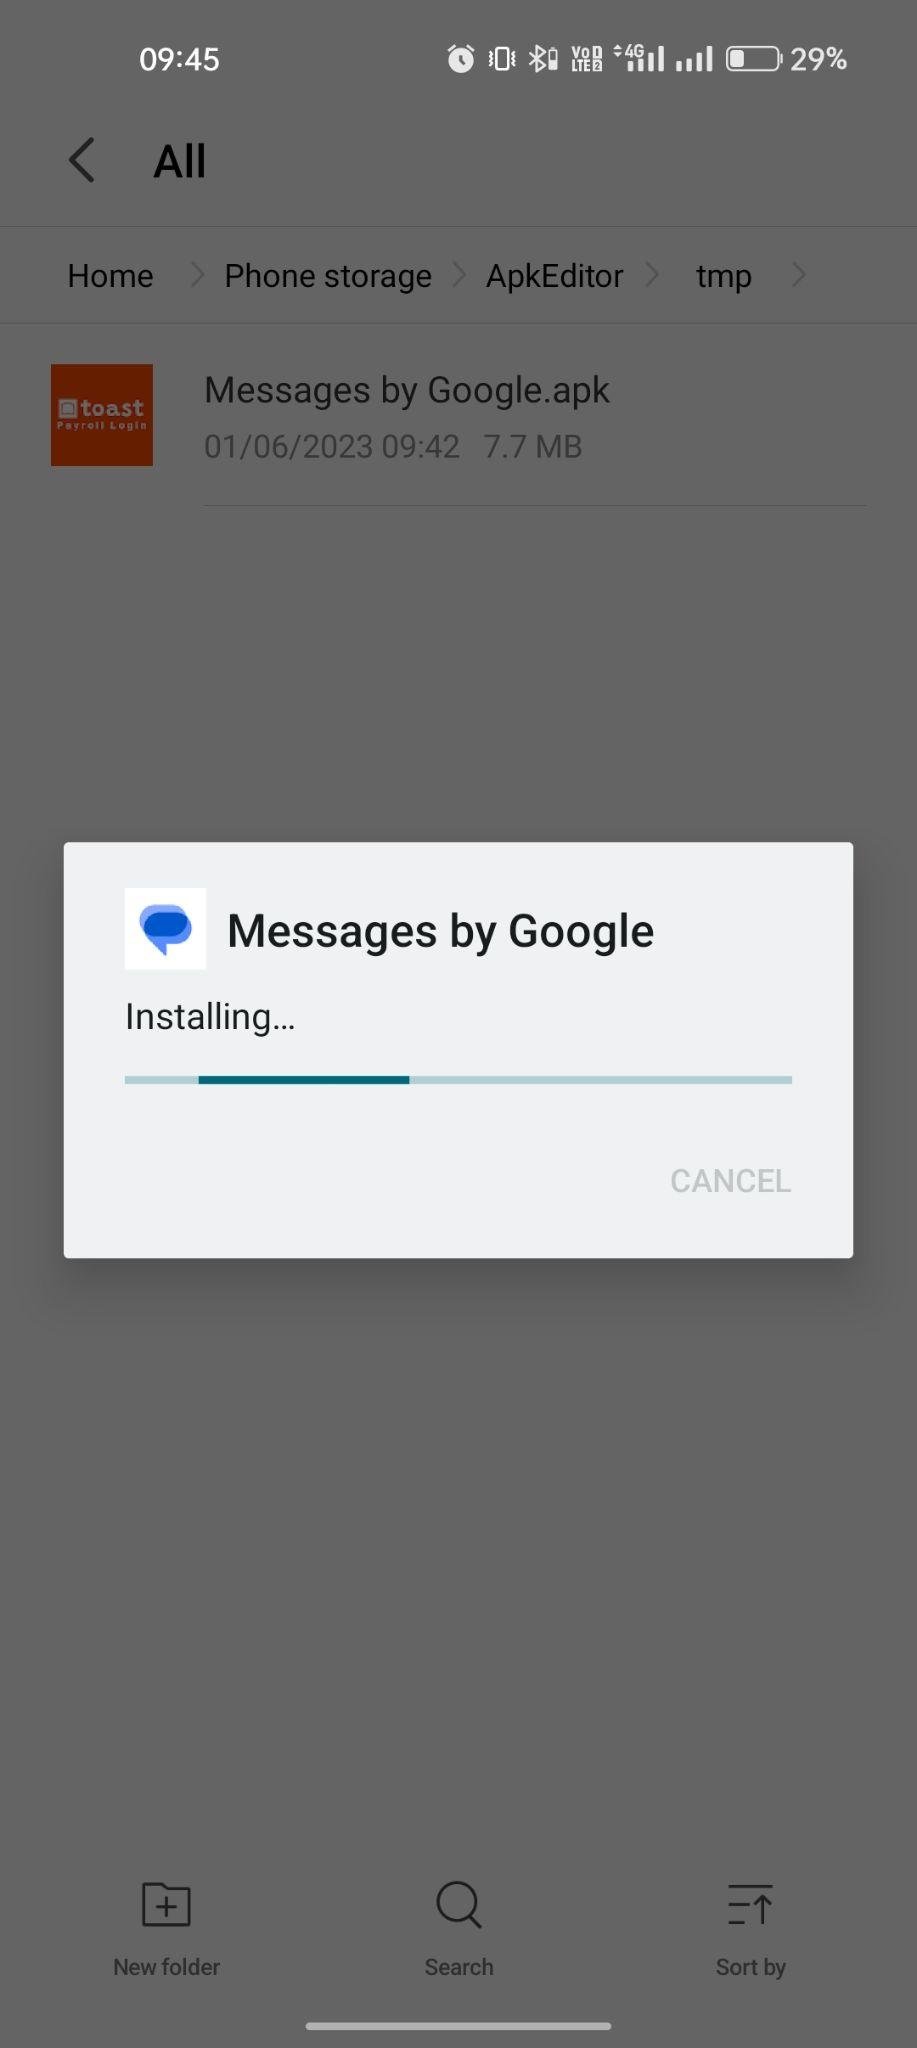 Messages by Google apk installing